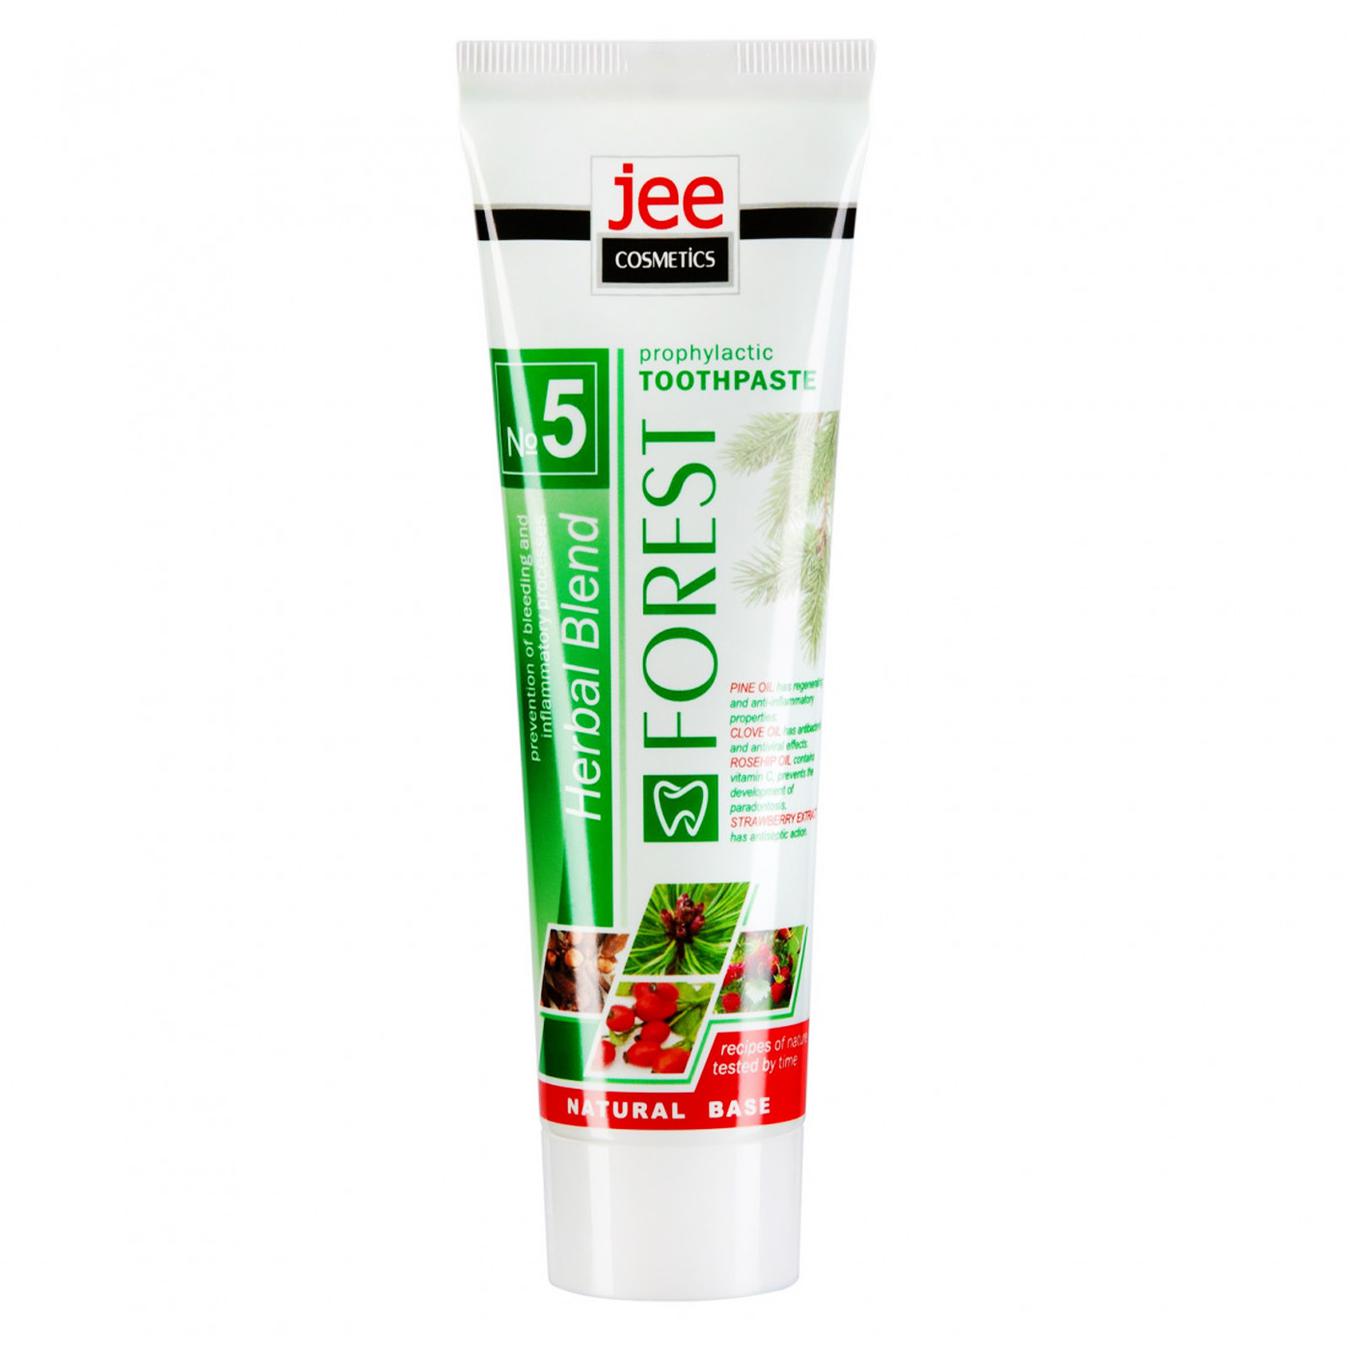 Toothpaste Jee Cosmetics preventive medical collection No. 5 Forest 100 ml